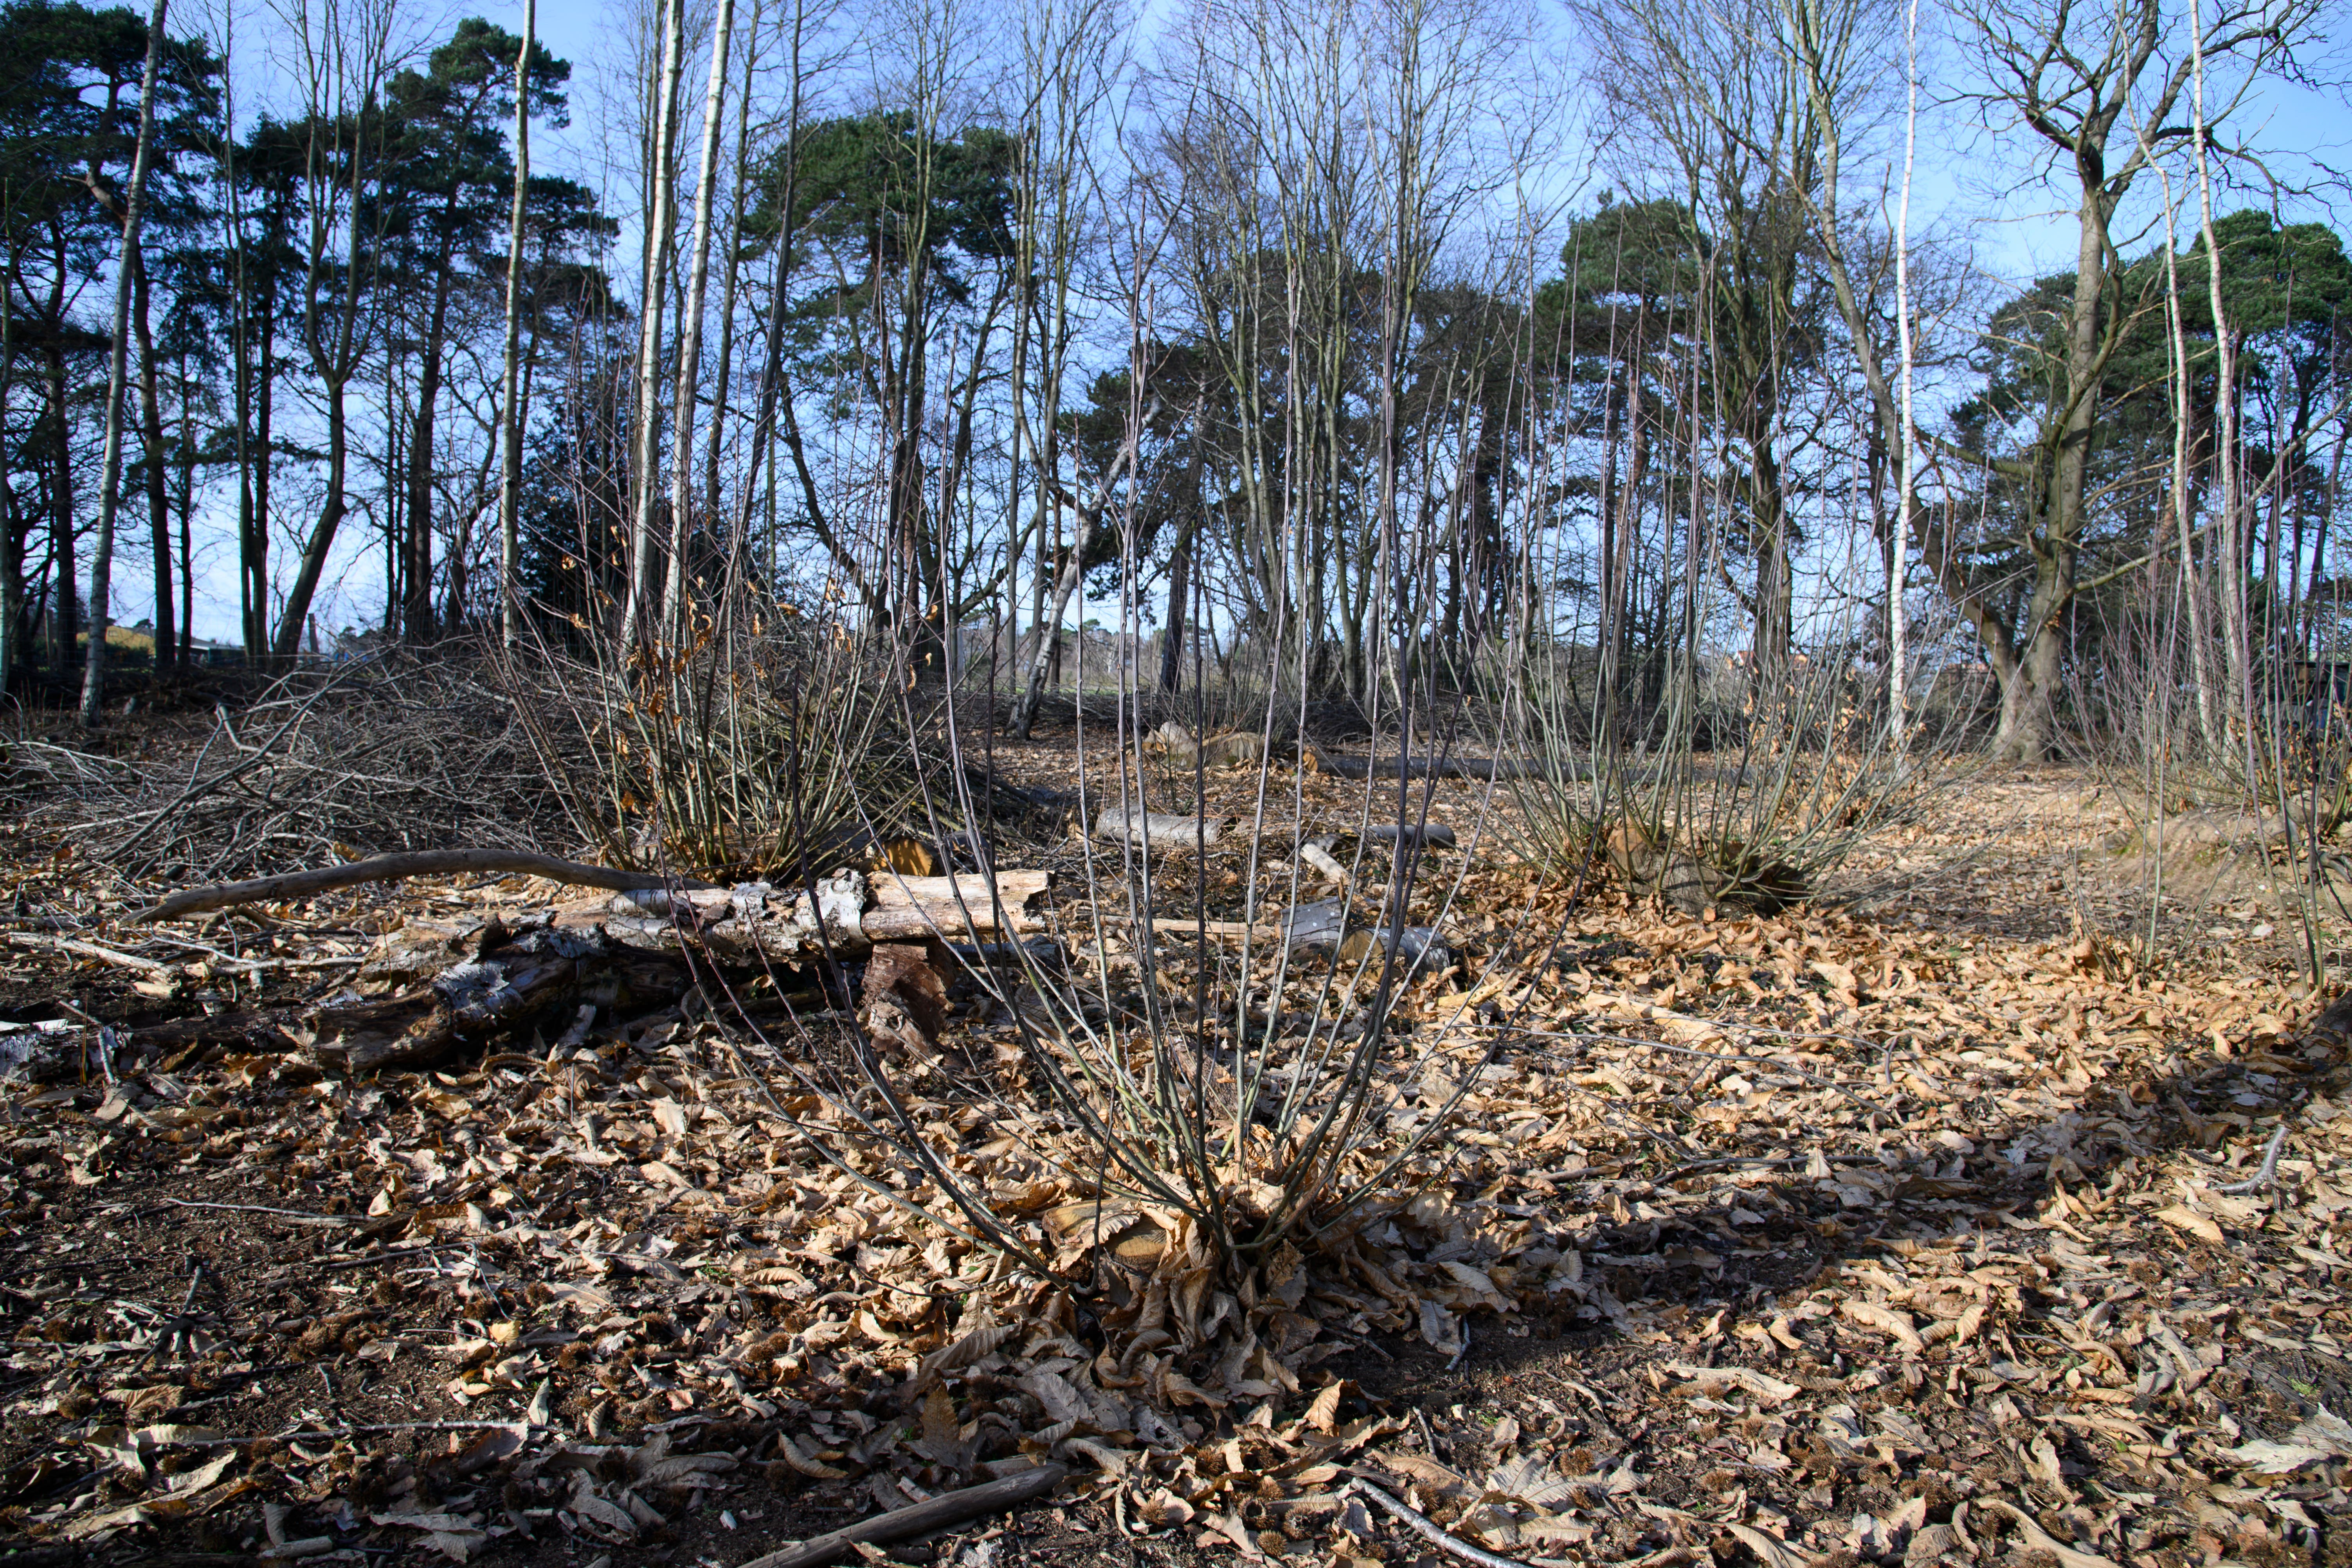 Coppicing work takes place at Sutton Hoo (National Trust Images/Darren Olley/PA)